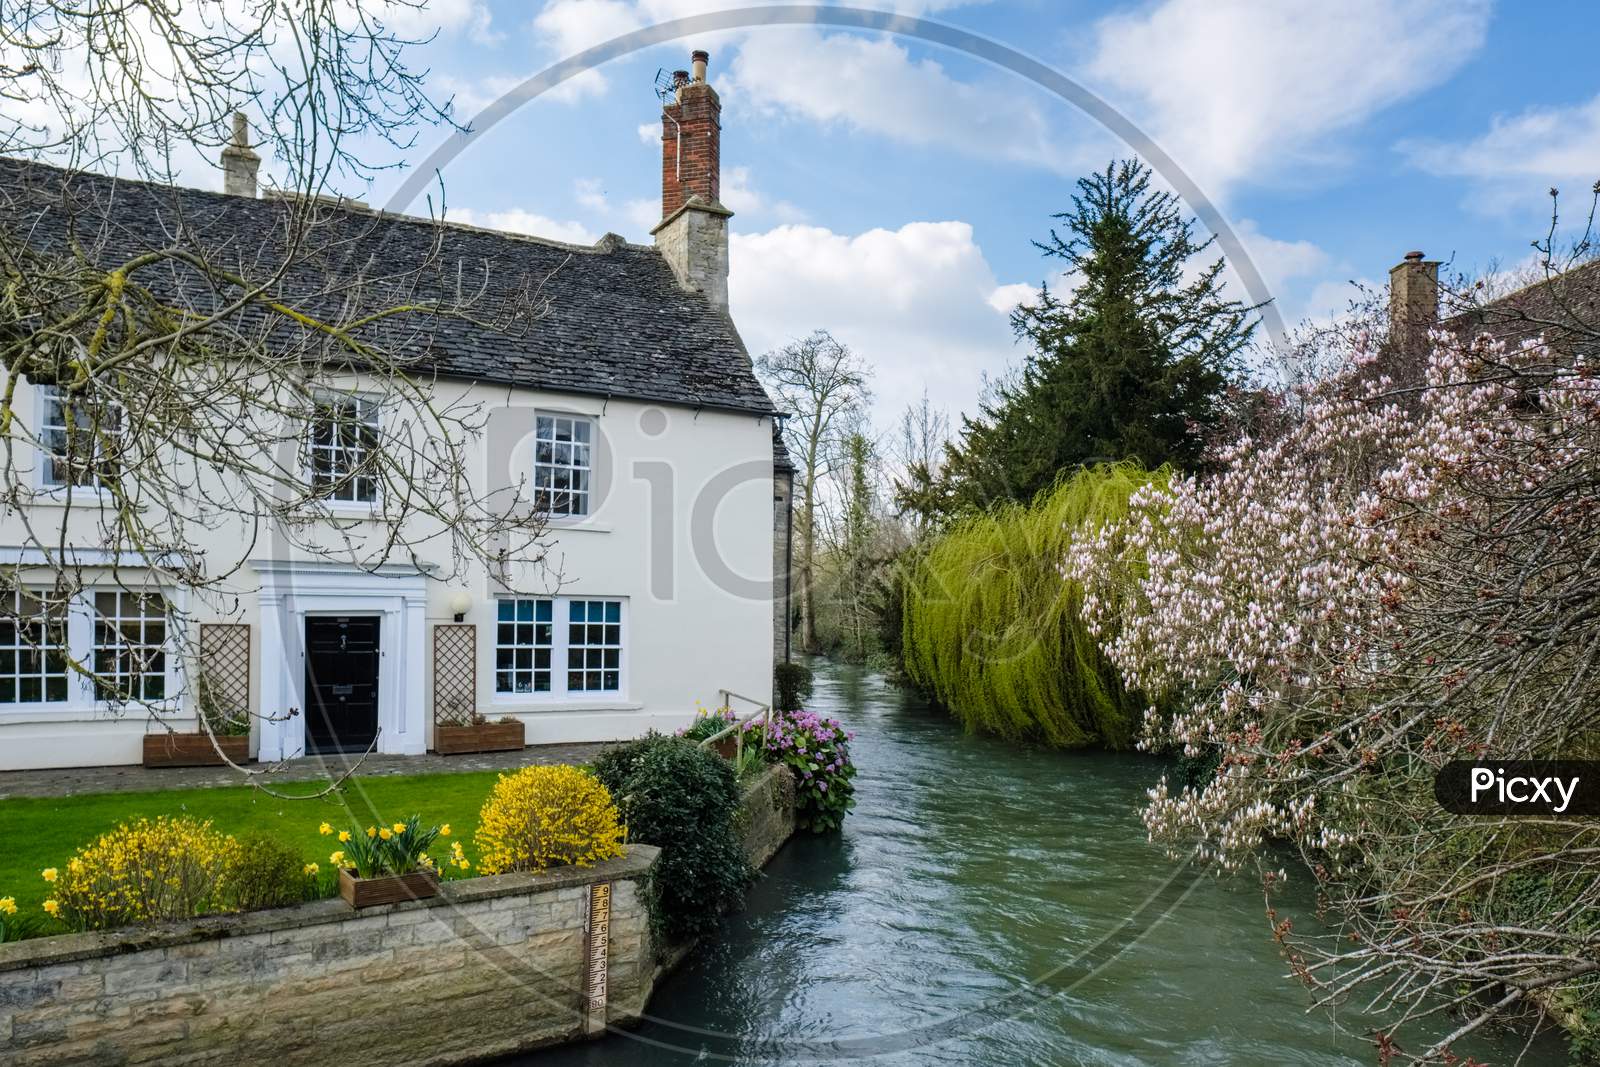 Picturesque Cottage Beside The River Windrush In Witney